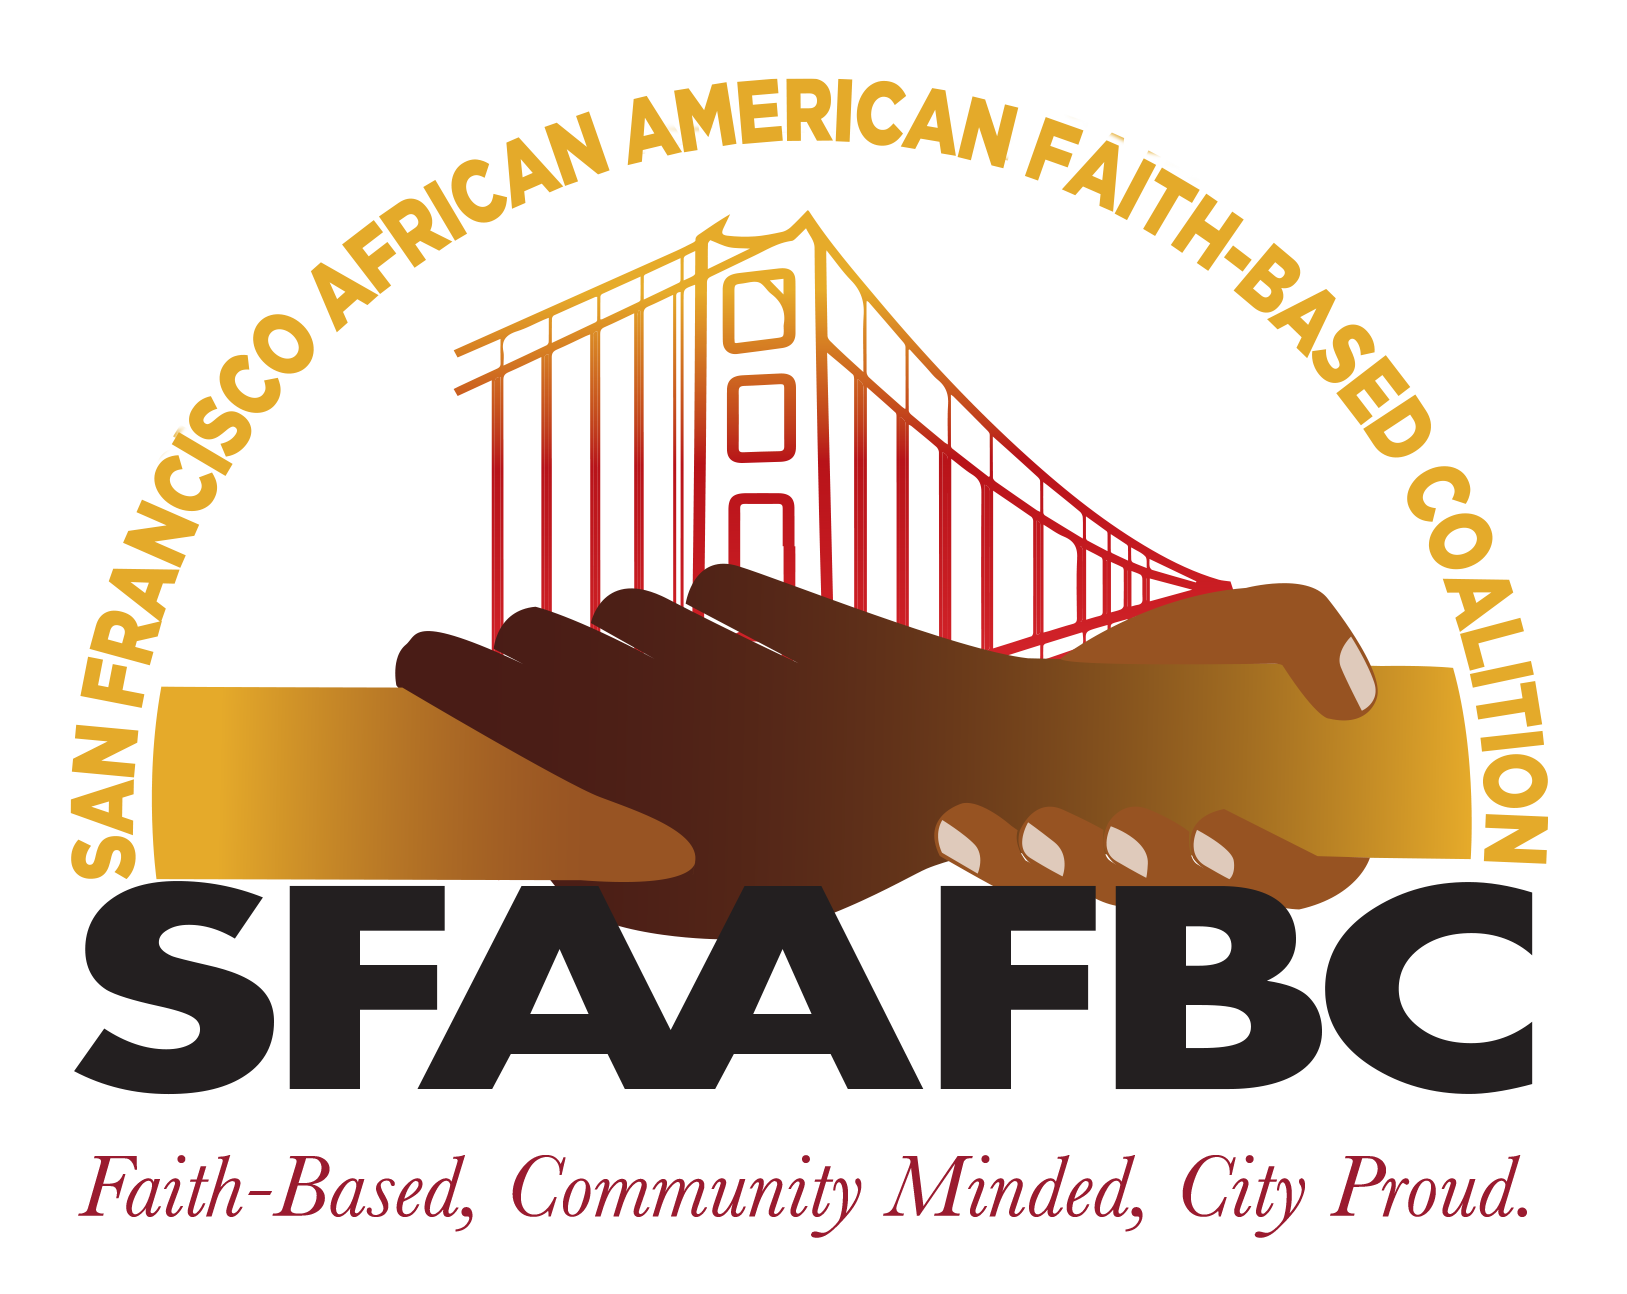 SFAABC LOGO YELLOW WITH RED TAG LINE - FLAT - Holly Houston.png